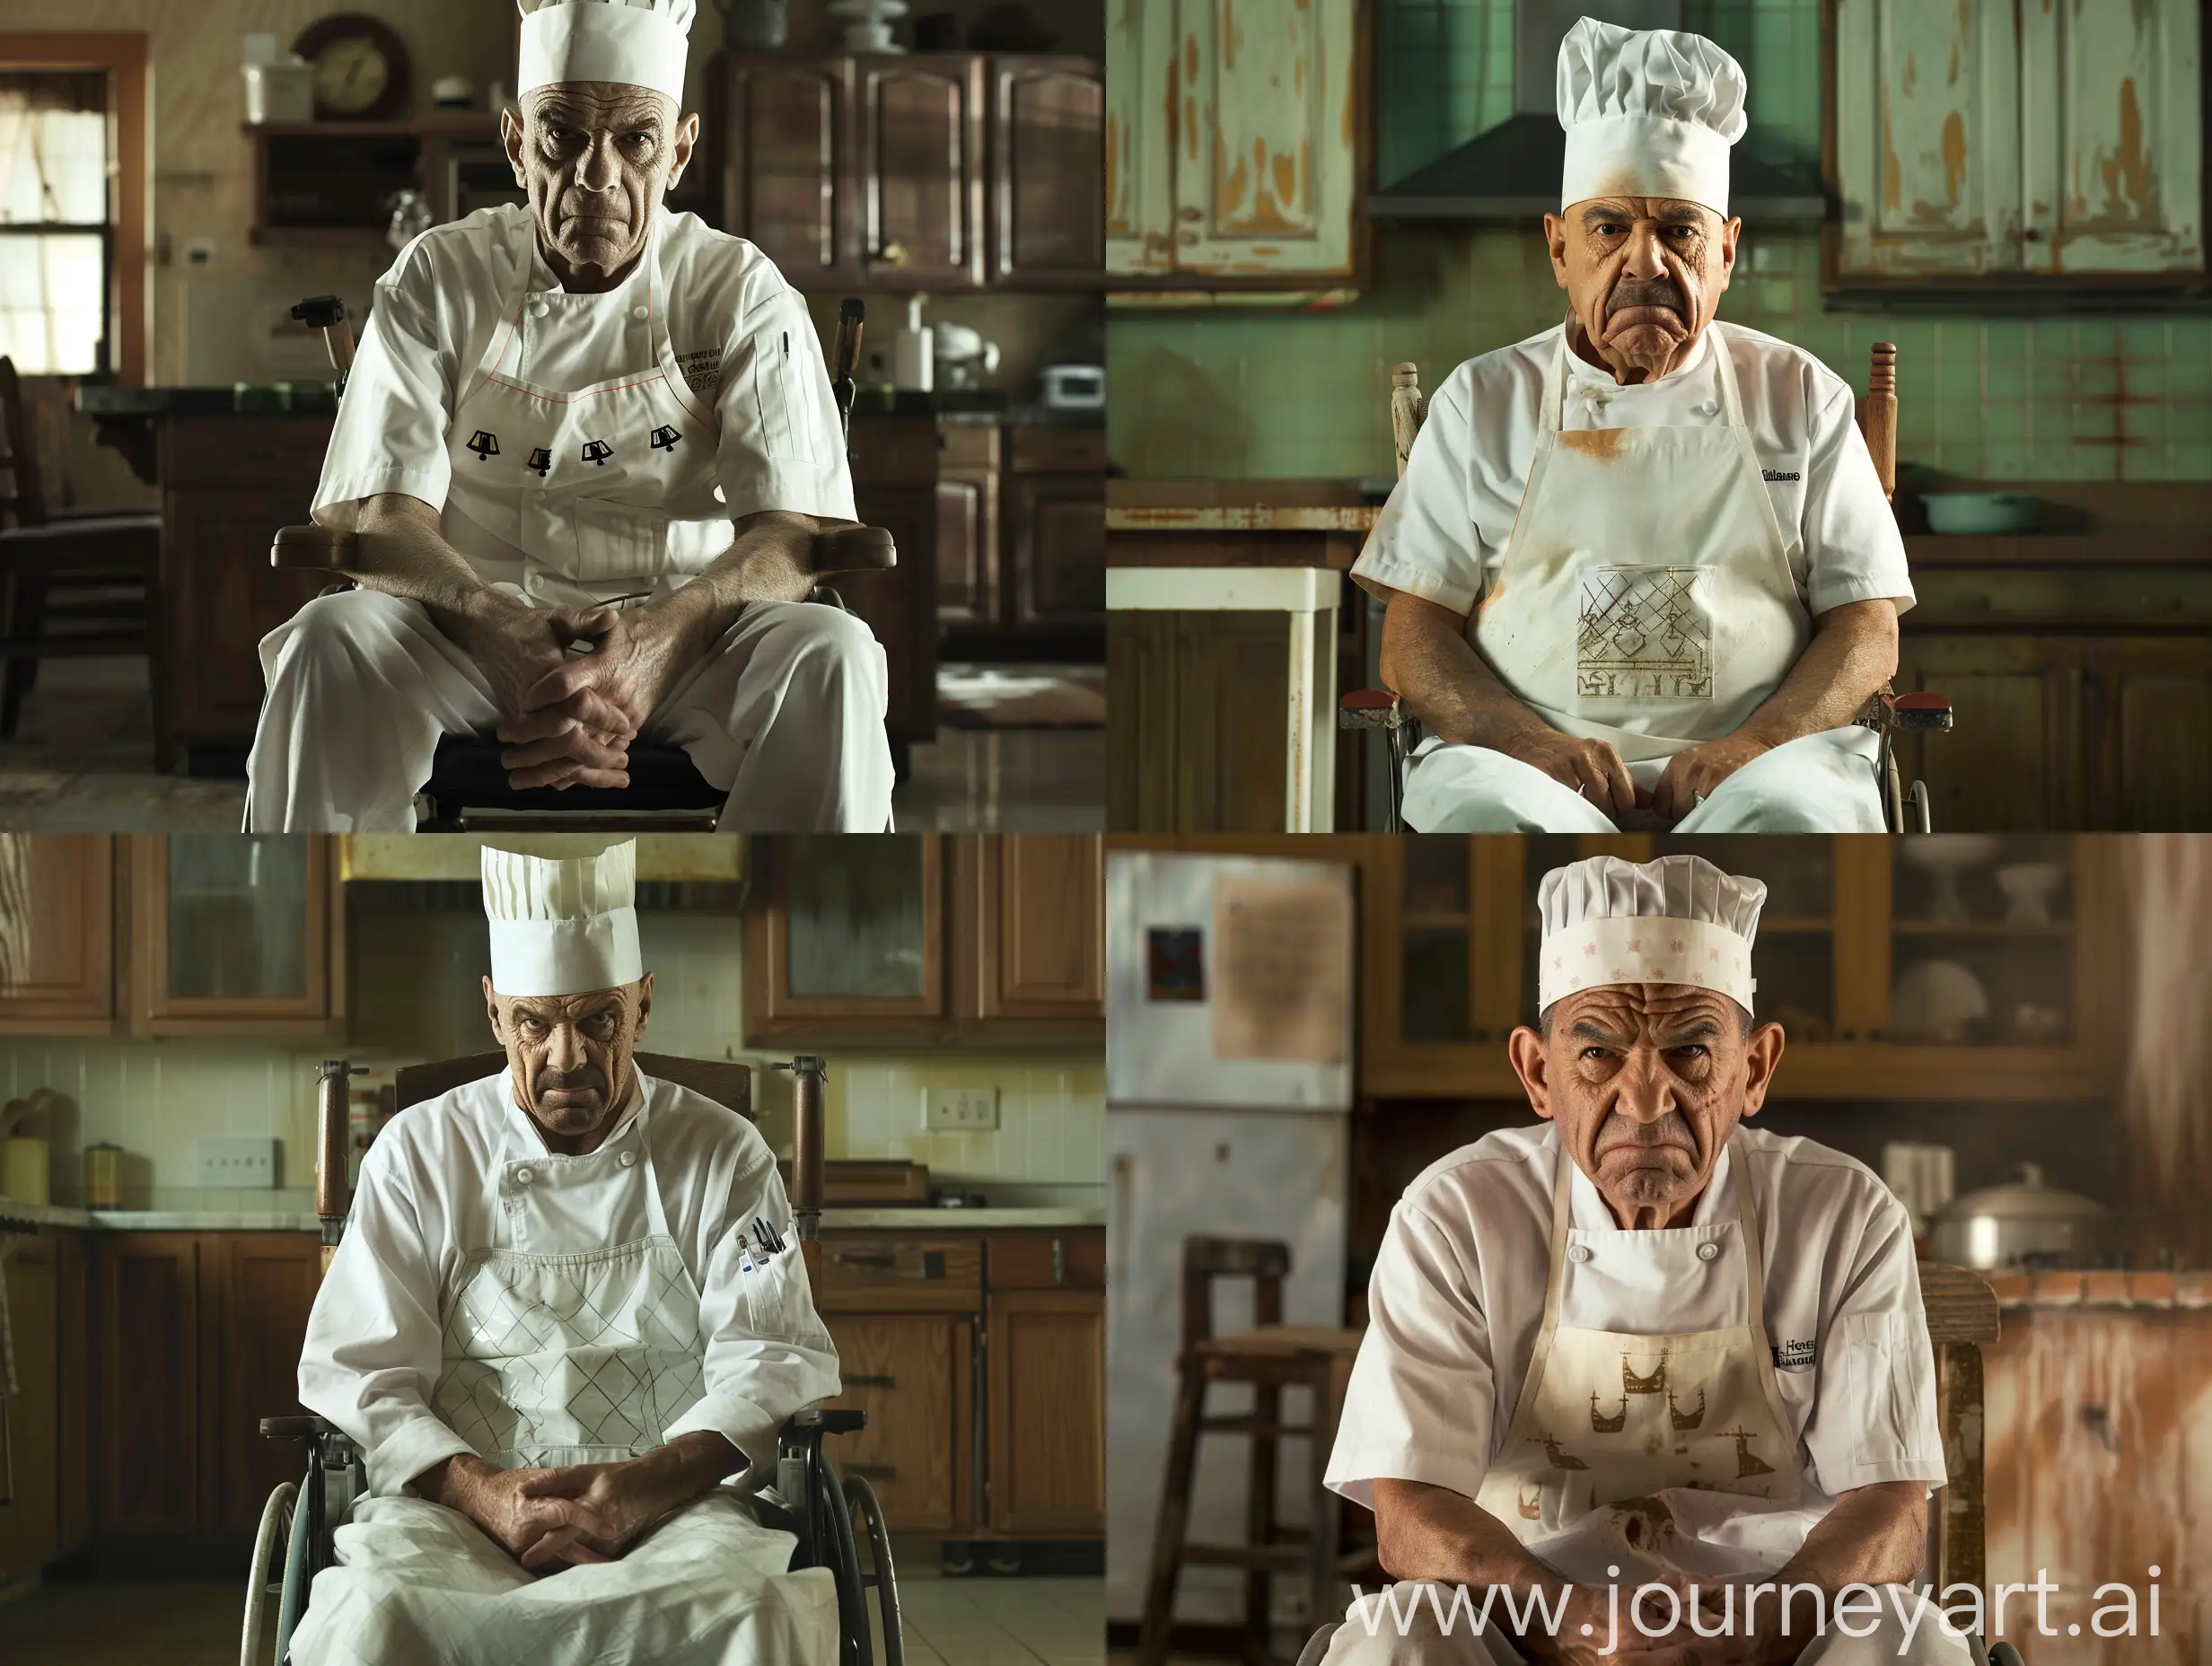 Hector Salamanca (played by Mark Margulies) is bad in Breaking Bad. Hector Salamanca's role in Breaking Bad is a former drug trafficker who communicates only through the use of a bell attached to his wheelchair. Hector Salamanca is sitting on an old wooden chair. Hector Salamanca wearing white chef uniform, Hector Salamanca wearing a chef hat, Hector Salamanca wearing a white kitchen apron with a bell pattern, kitchen background, Hector Salamanca is angry, modern lighting, very high quality picture, very clear, very real,q2